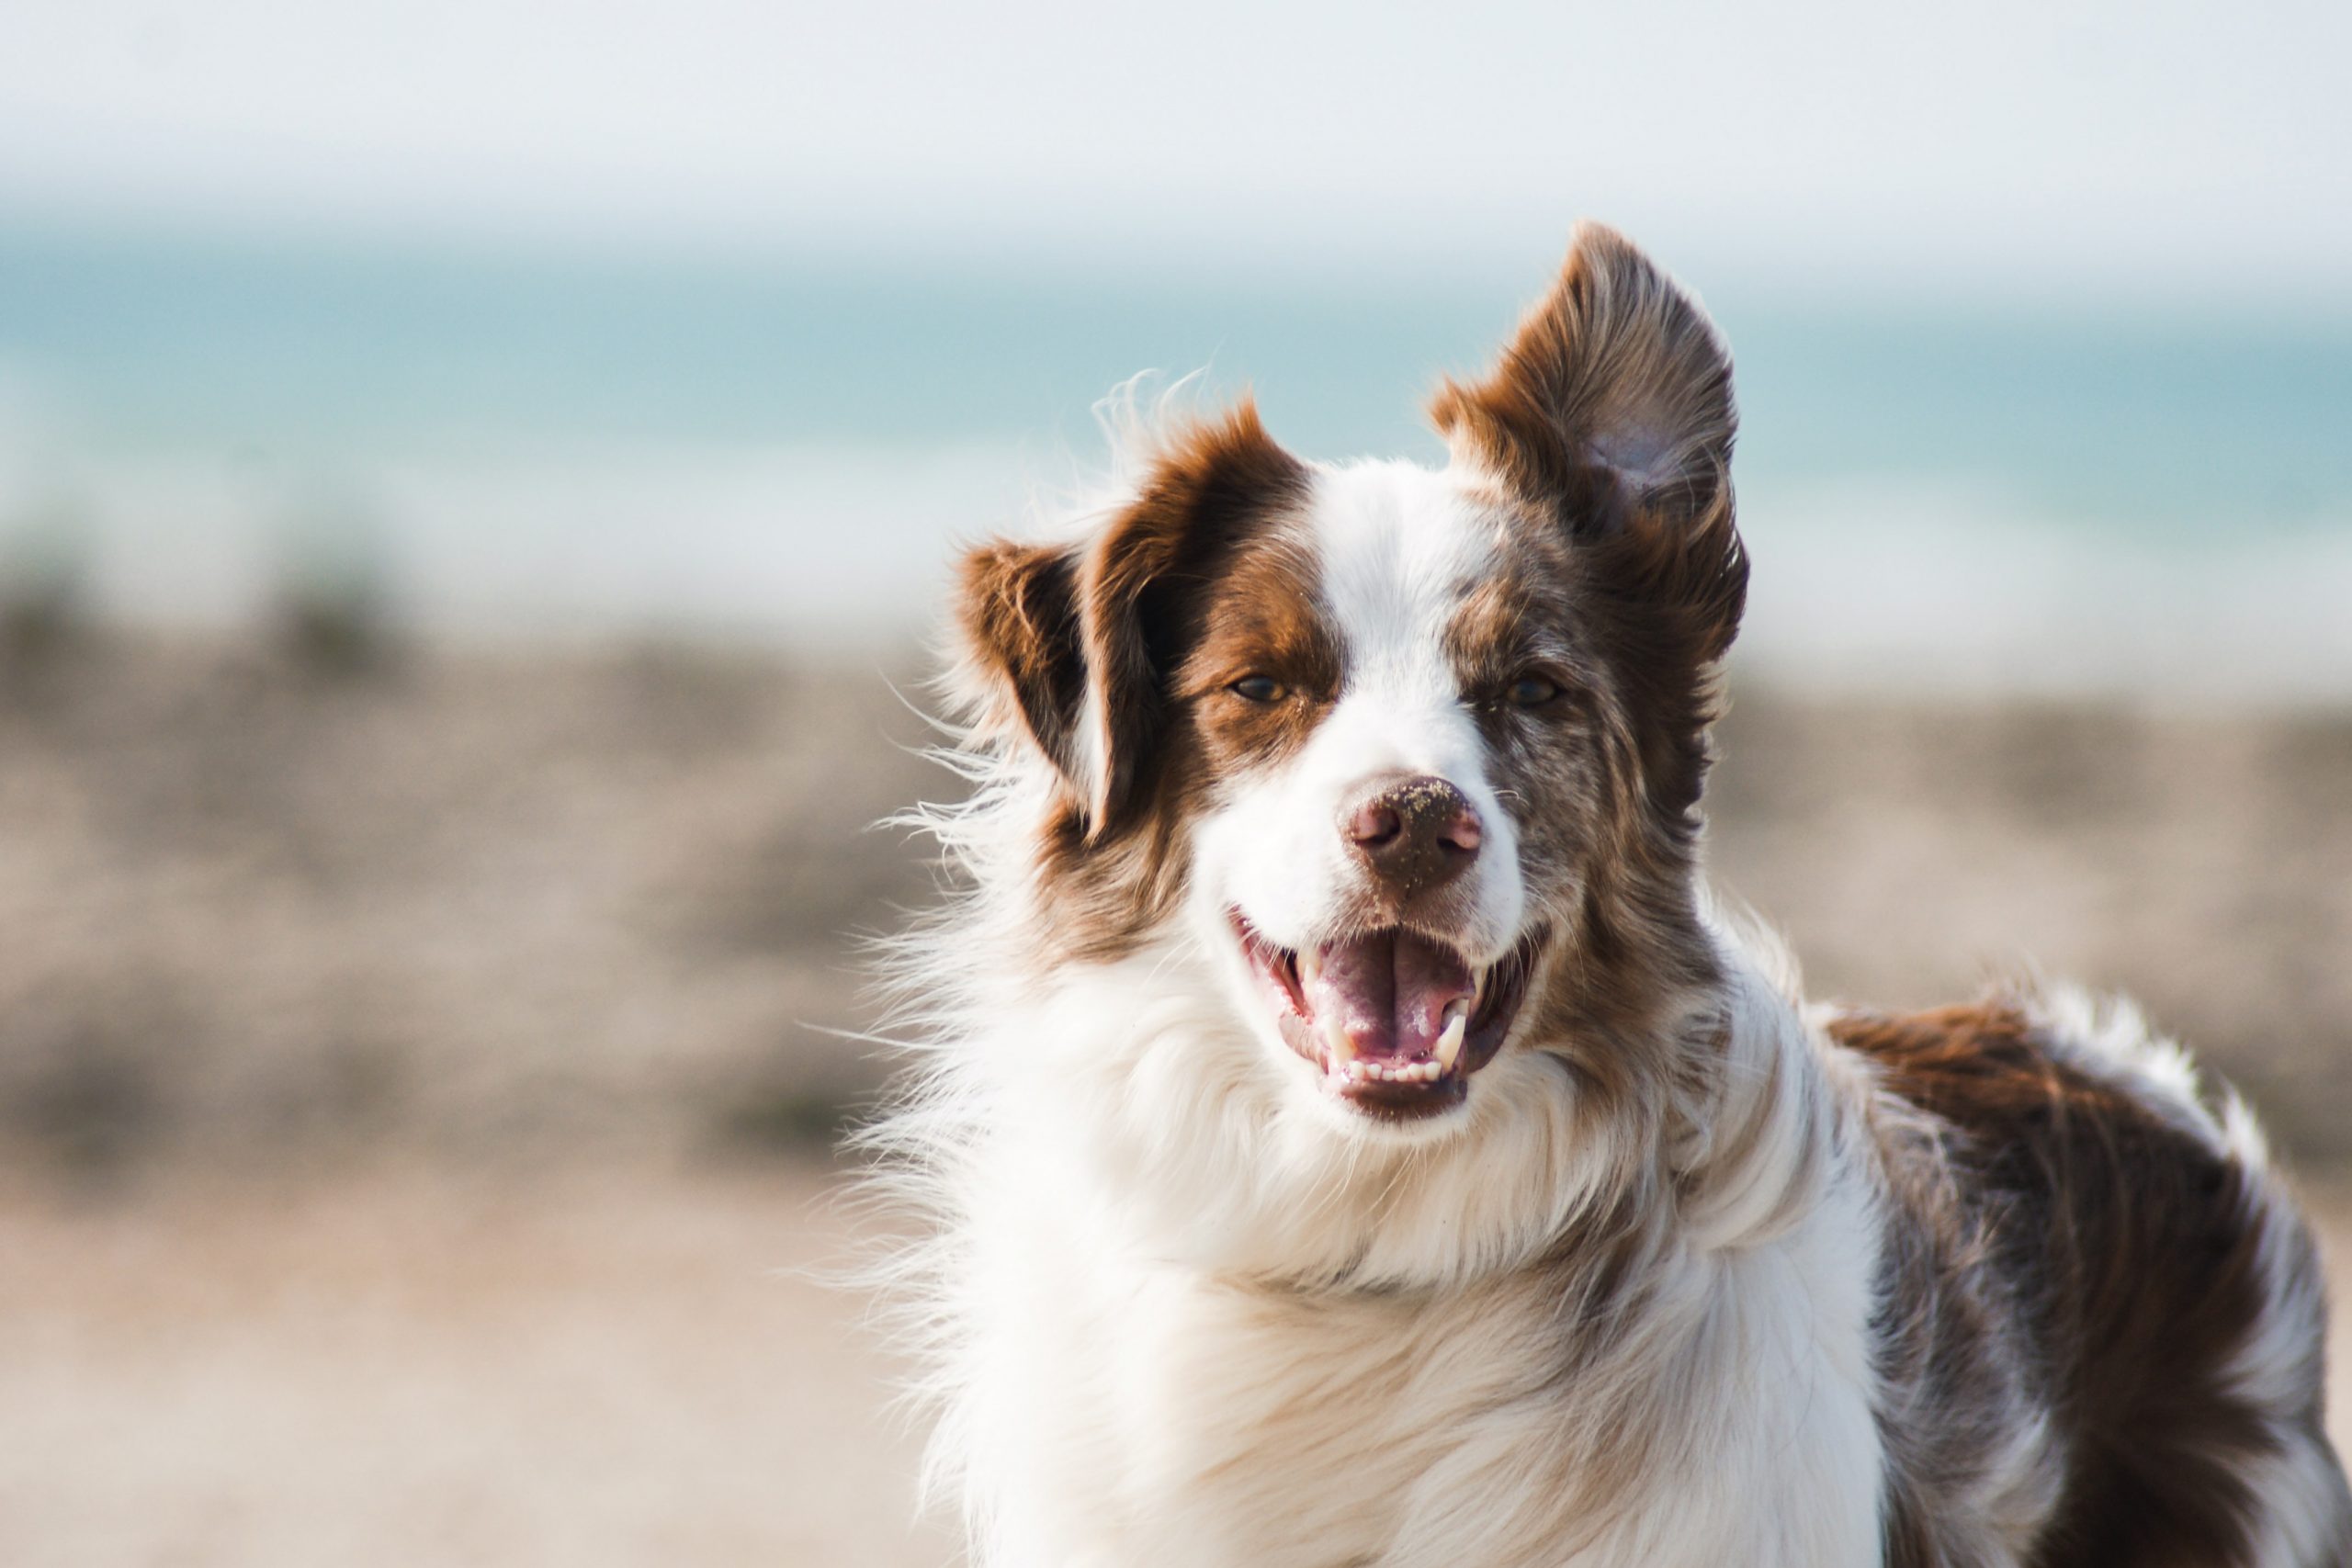 When To Get Pet Insurance For Your Dog – Things To Consider